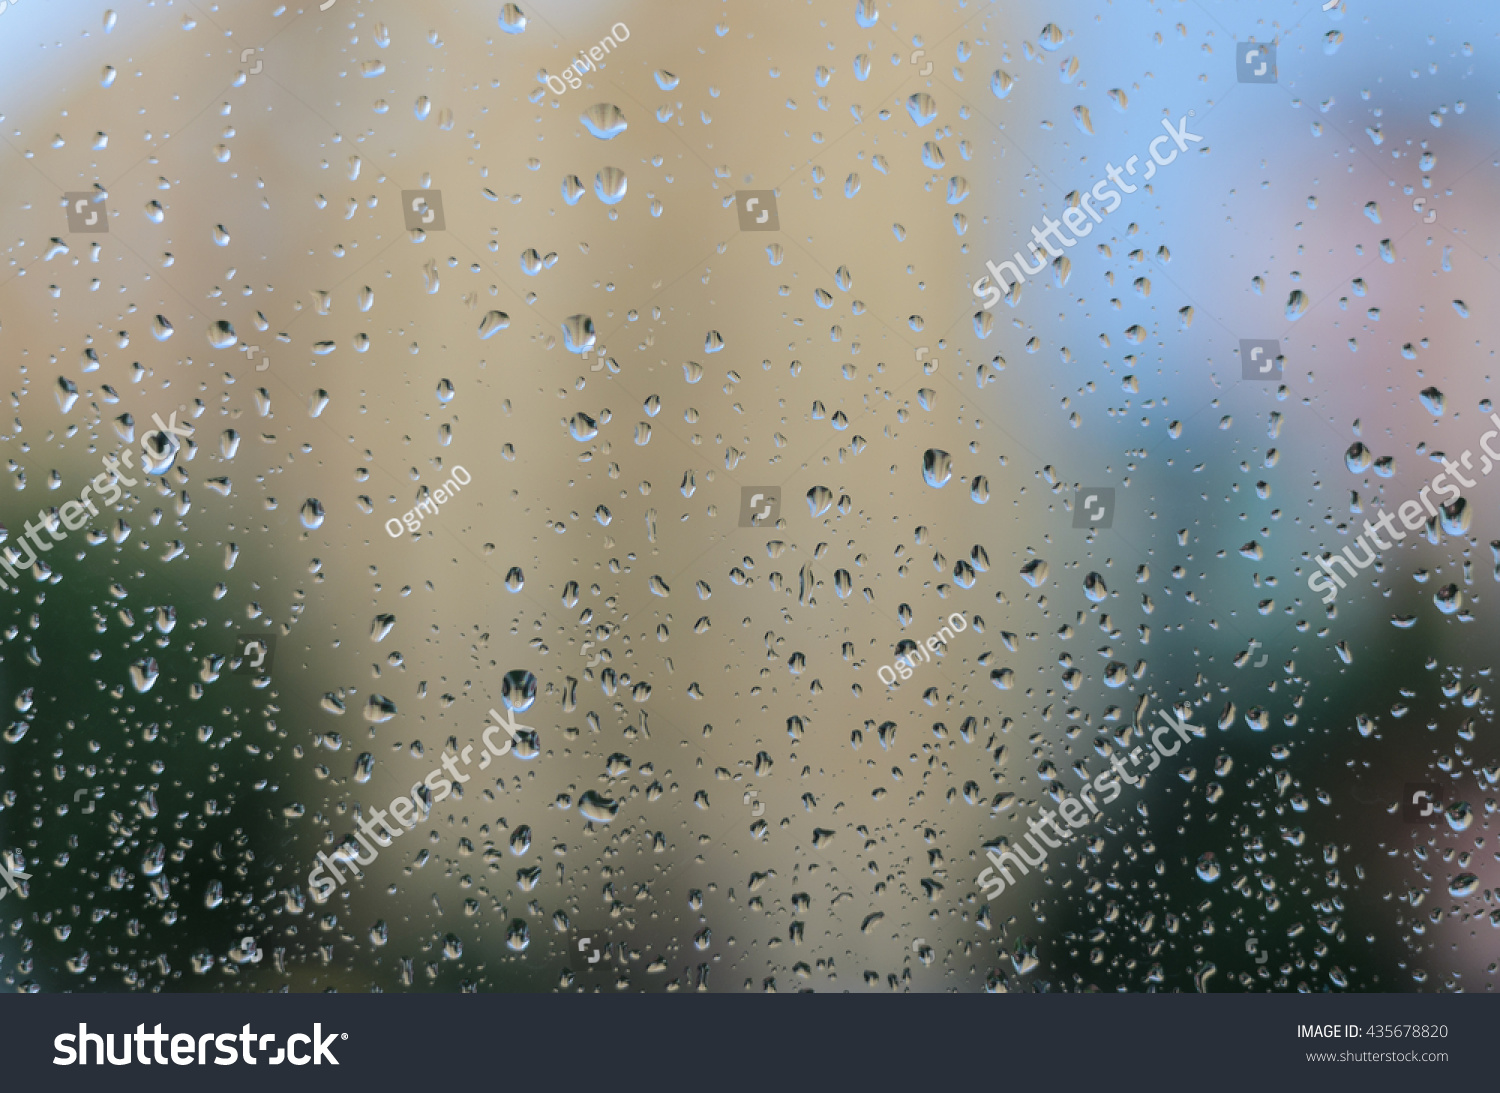 Rain drops on glass with a background #435678820